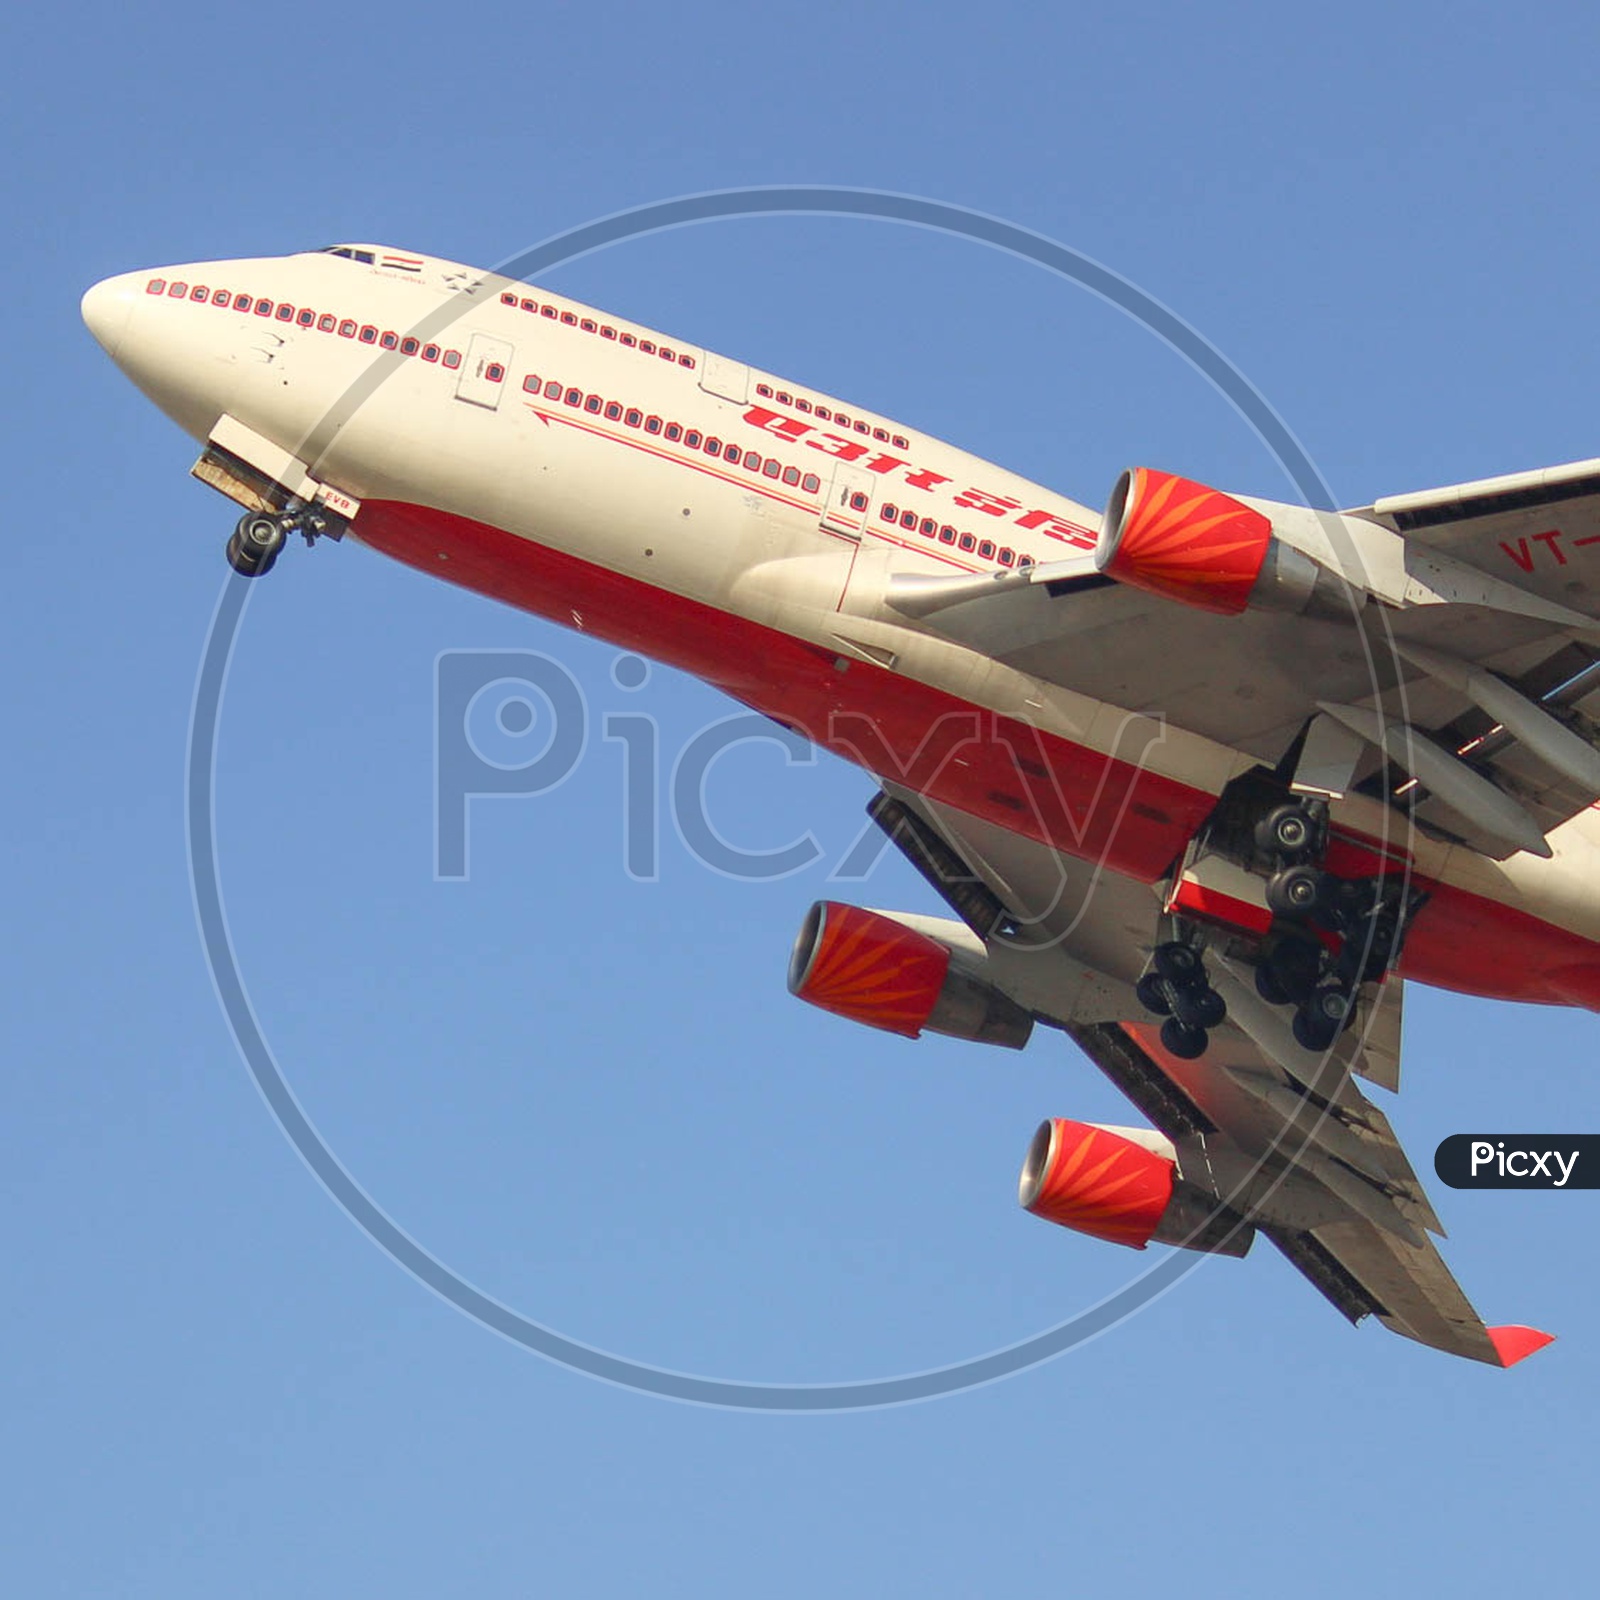 Air India B747 taking off for its fight to hyderabad onward to Jeddah.